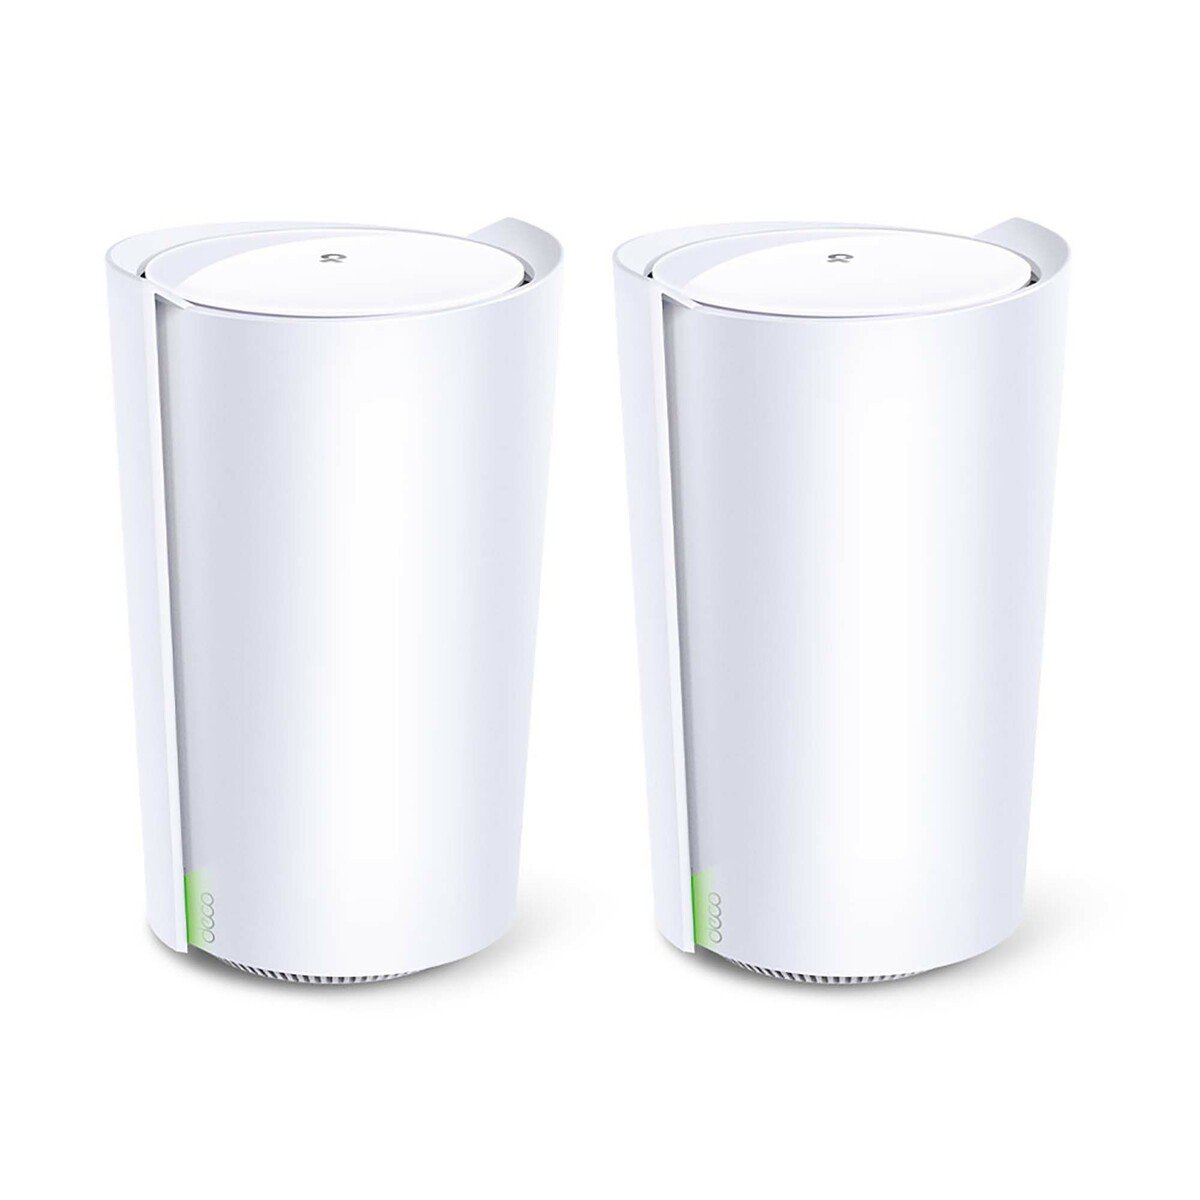 TPLINK AX6600 Whole Home Mesh Wi-Fi System Deco X90 (2 Pack)